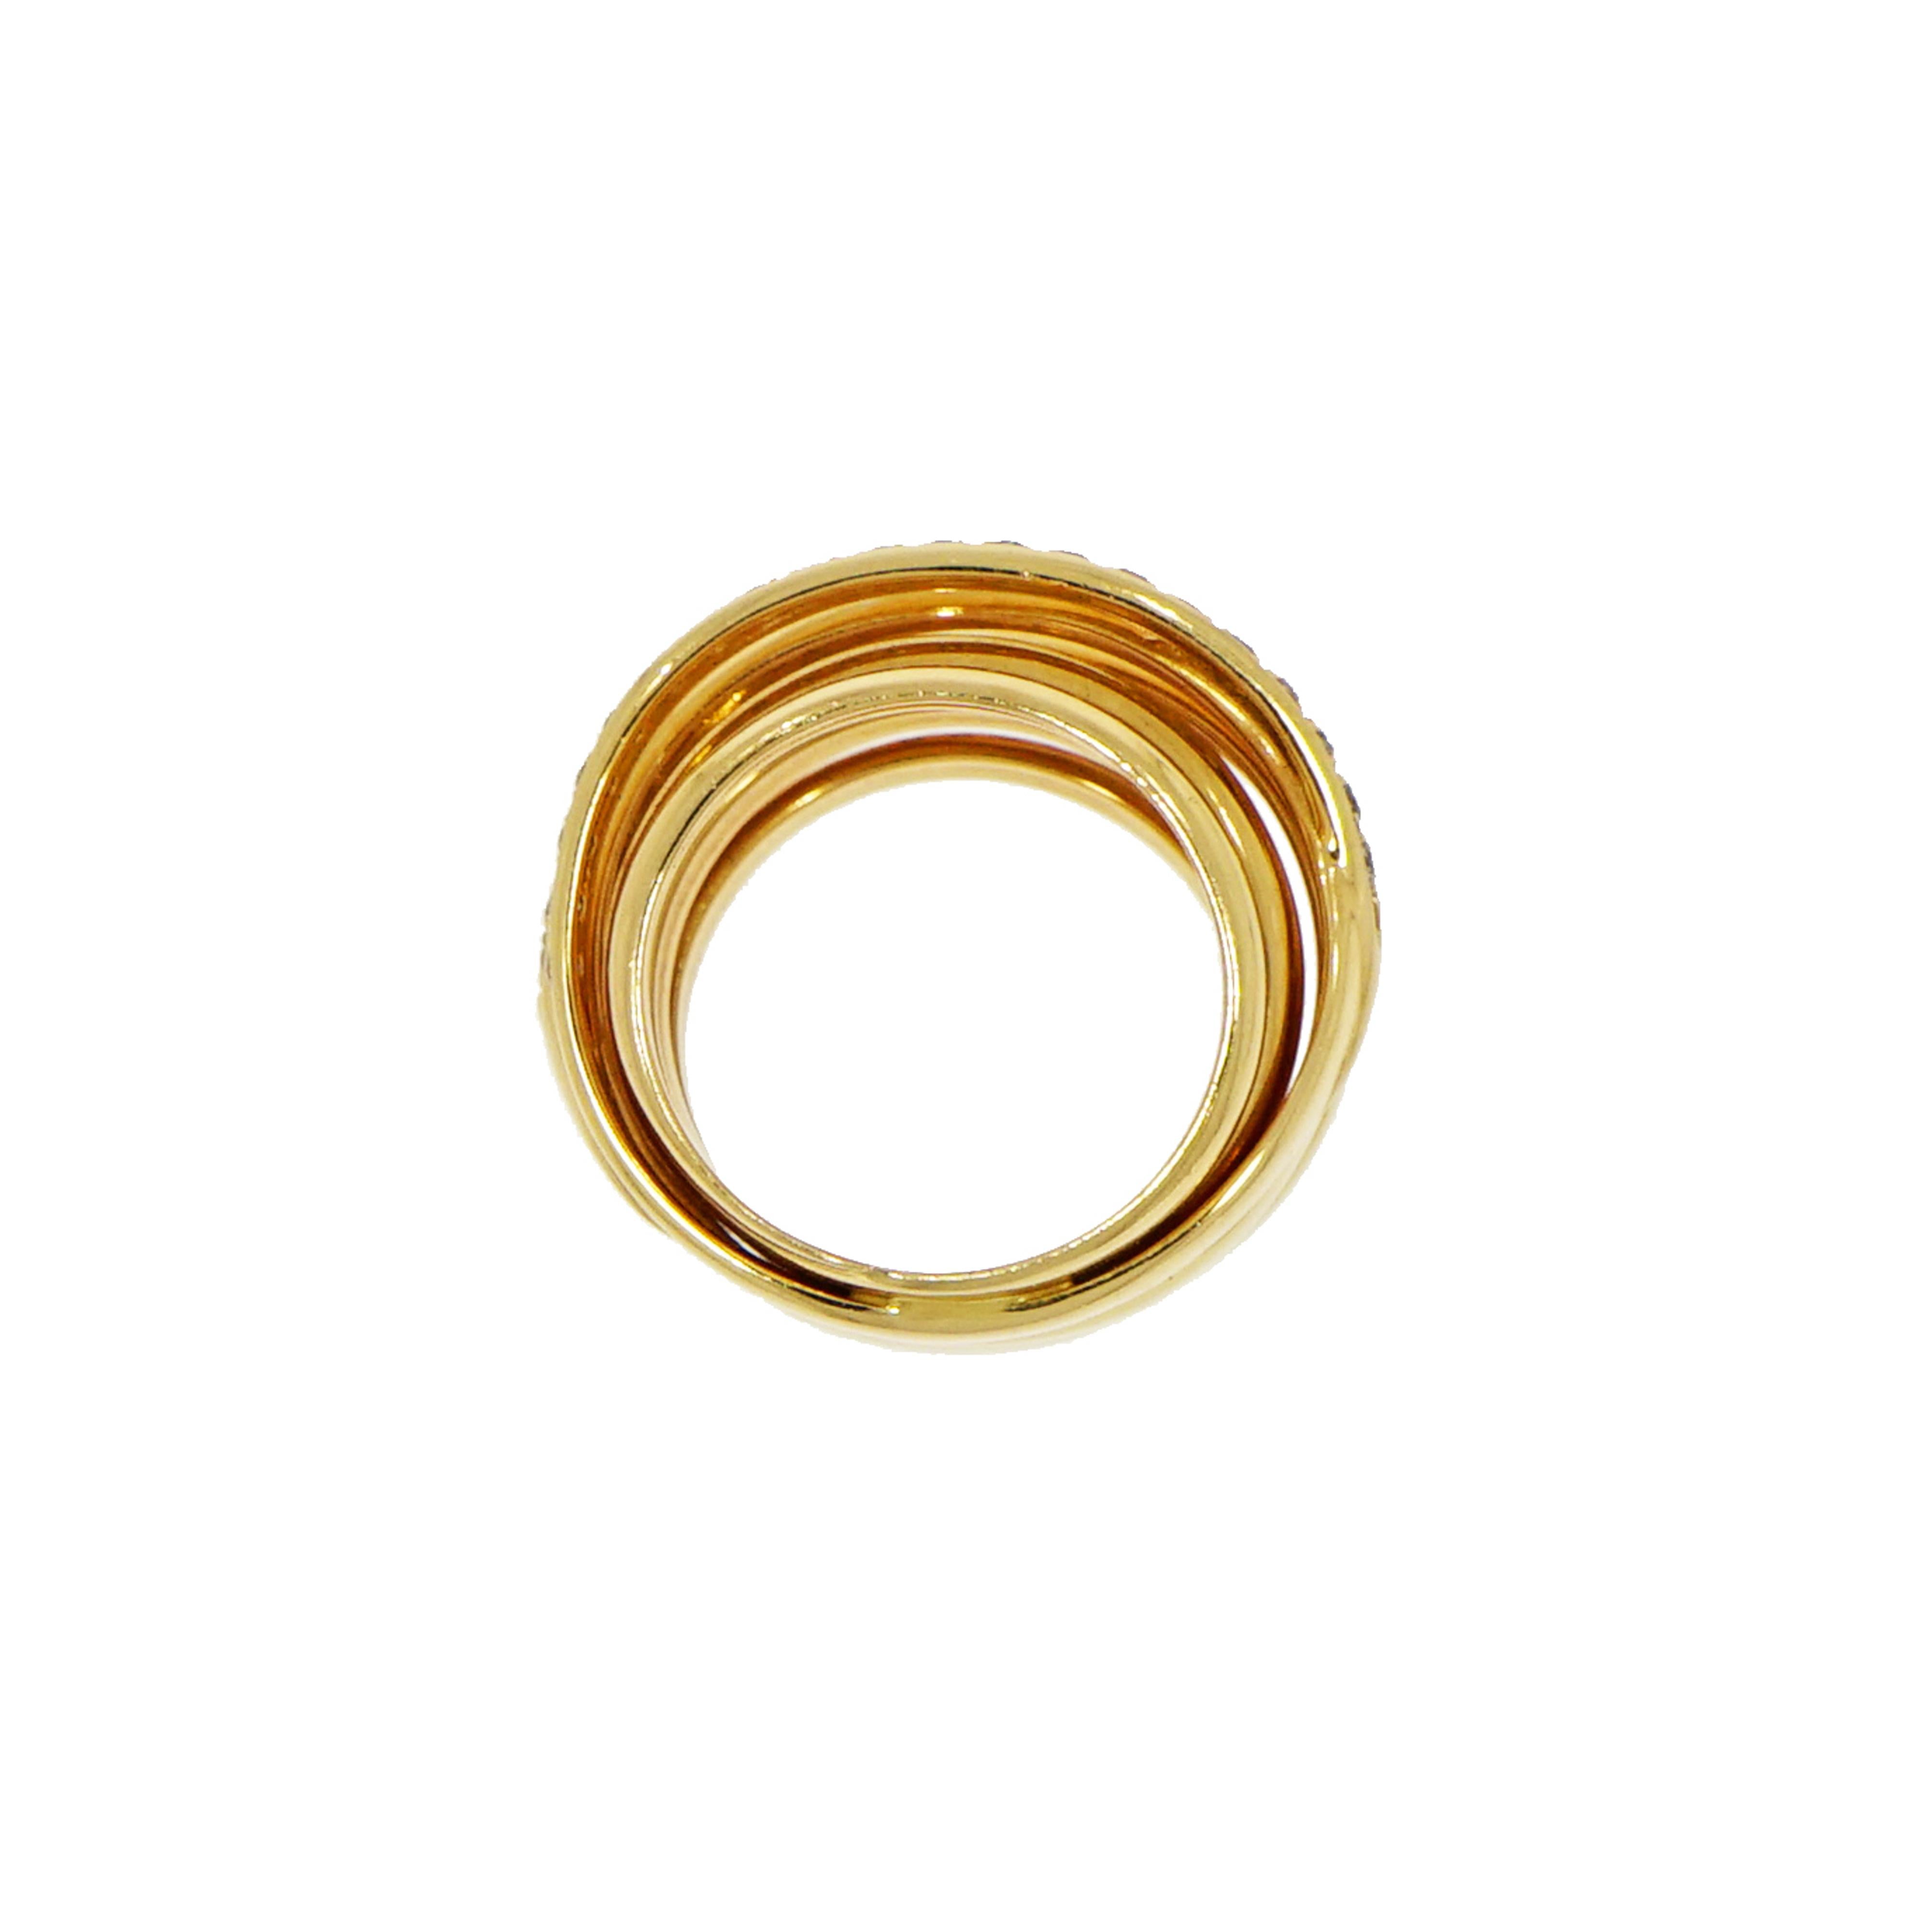 The traditional Himalayan ring is a real story reinterpreted by Mattioli, who called it Tibet in honor of the love legend. 
The Tibet Ring is a wish of well being and prosperity added to an invitation to meditate on changes that make every moment